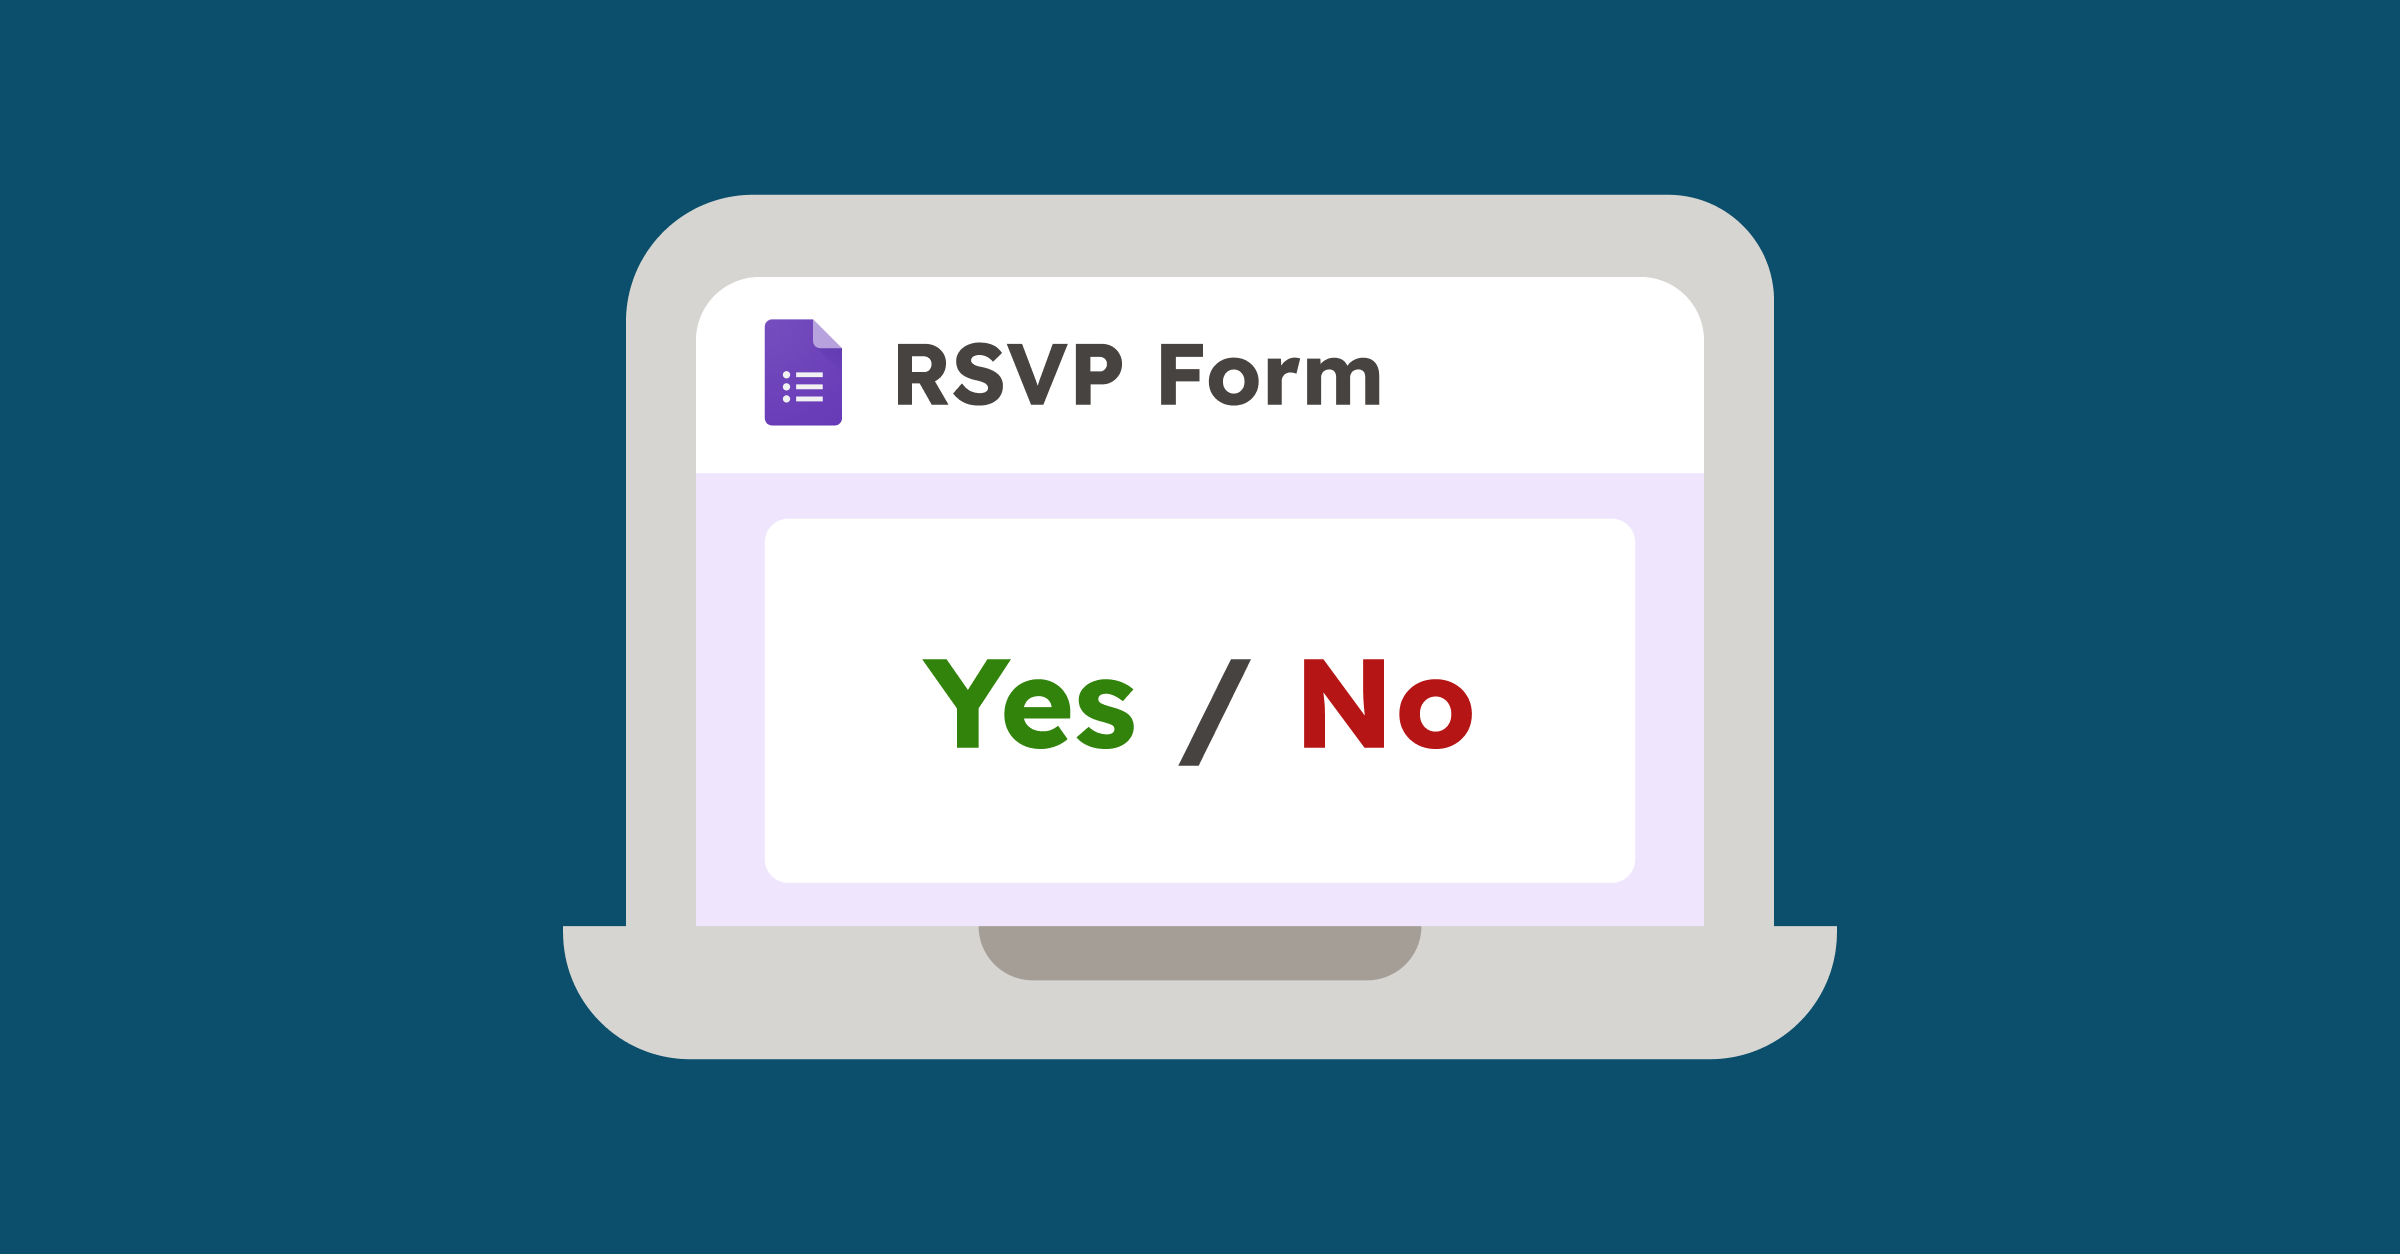 How to create a wedding RSVP form using Google Forms